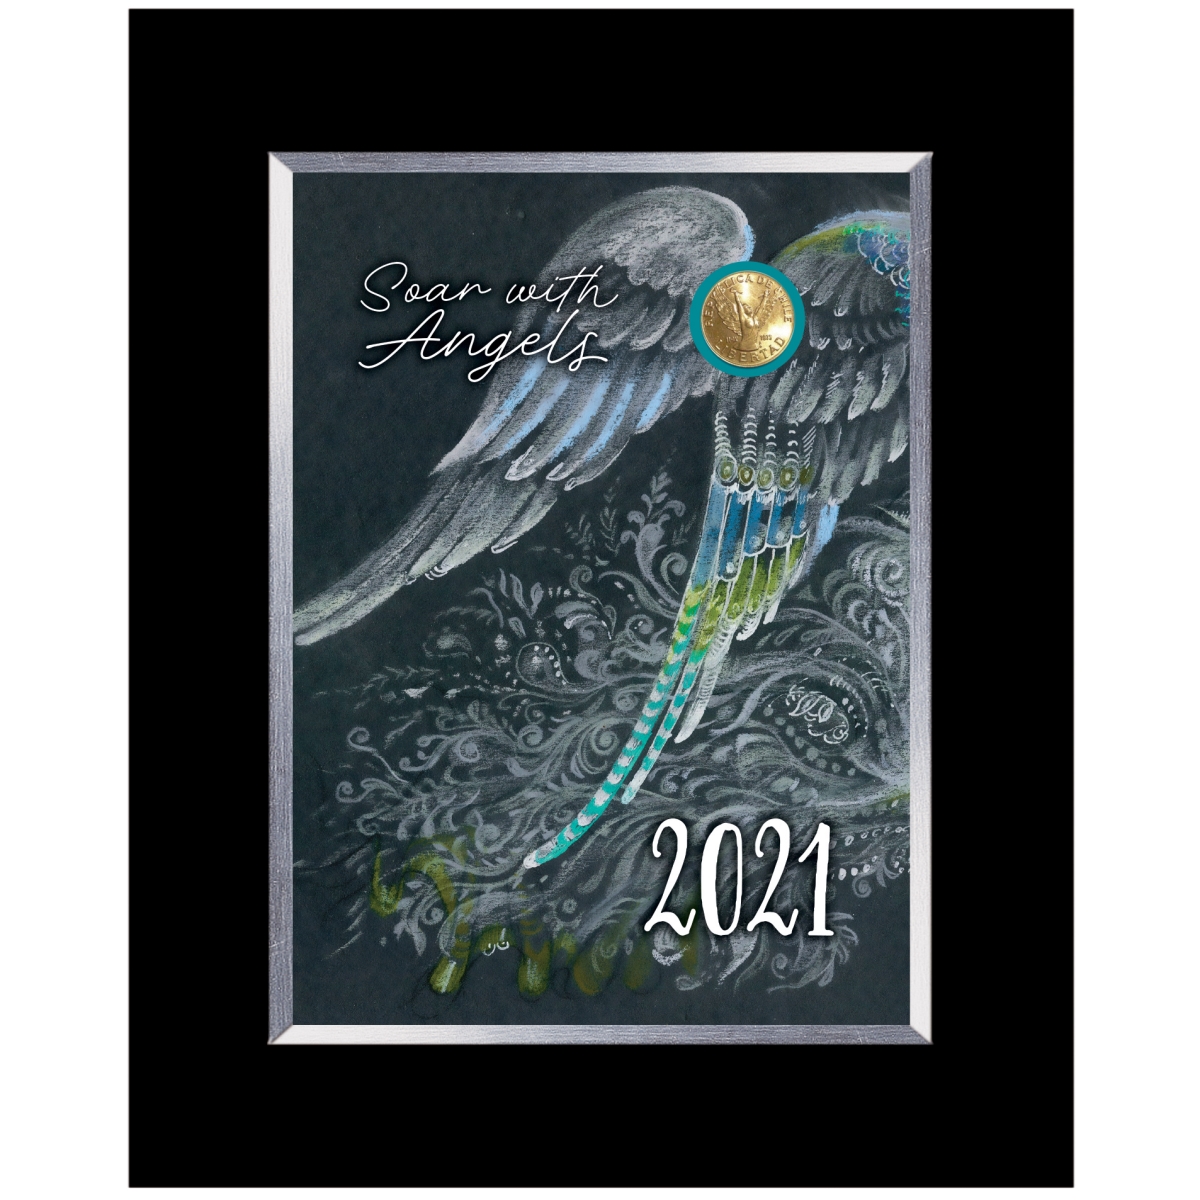 Picture of American Coin Treasures 16448 Soar with Angels Coin Decor Black Frame with Easel